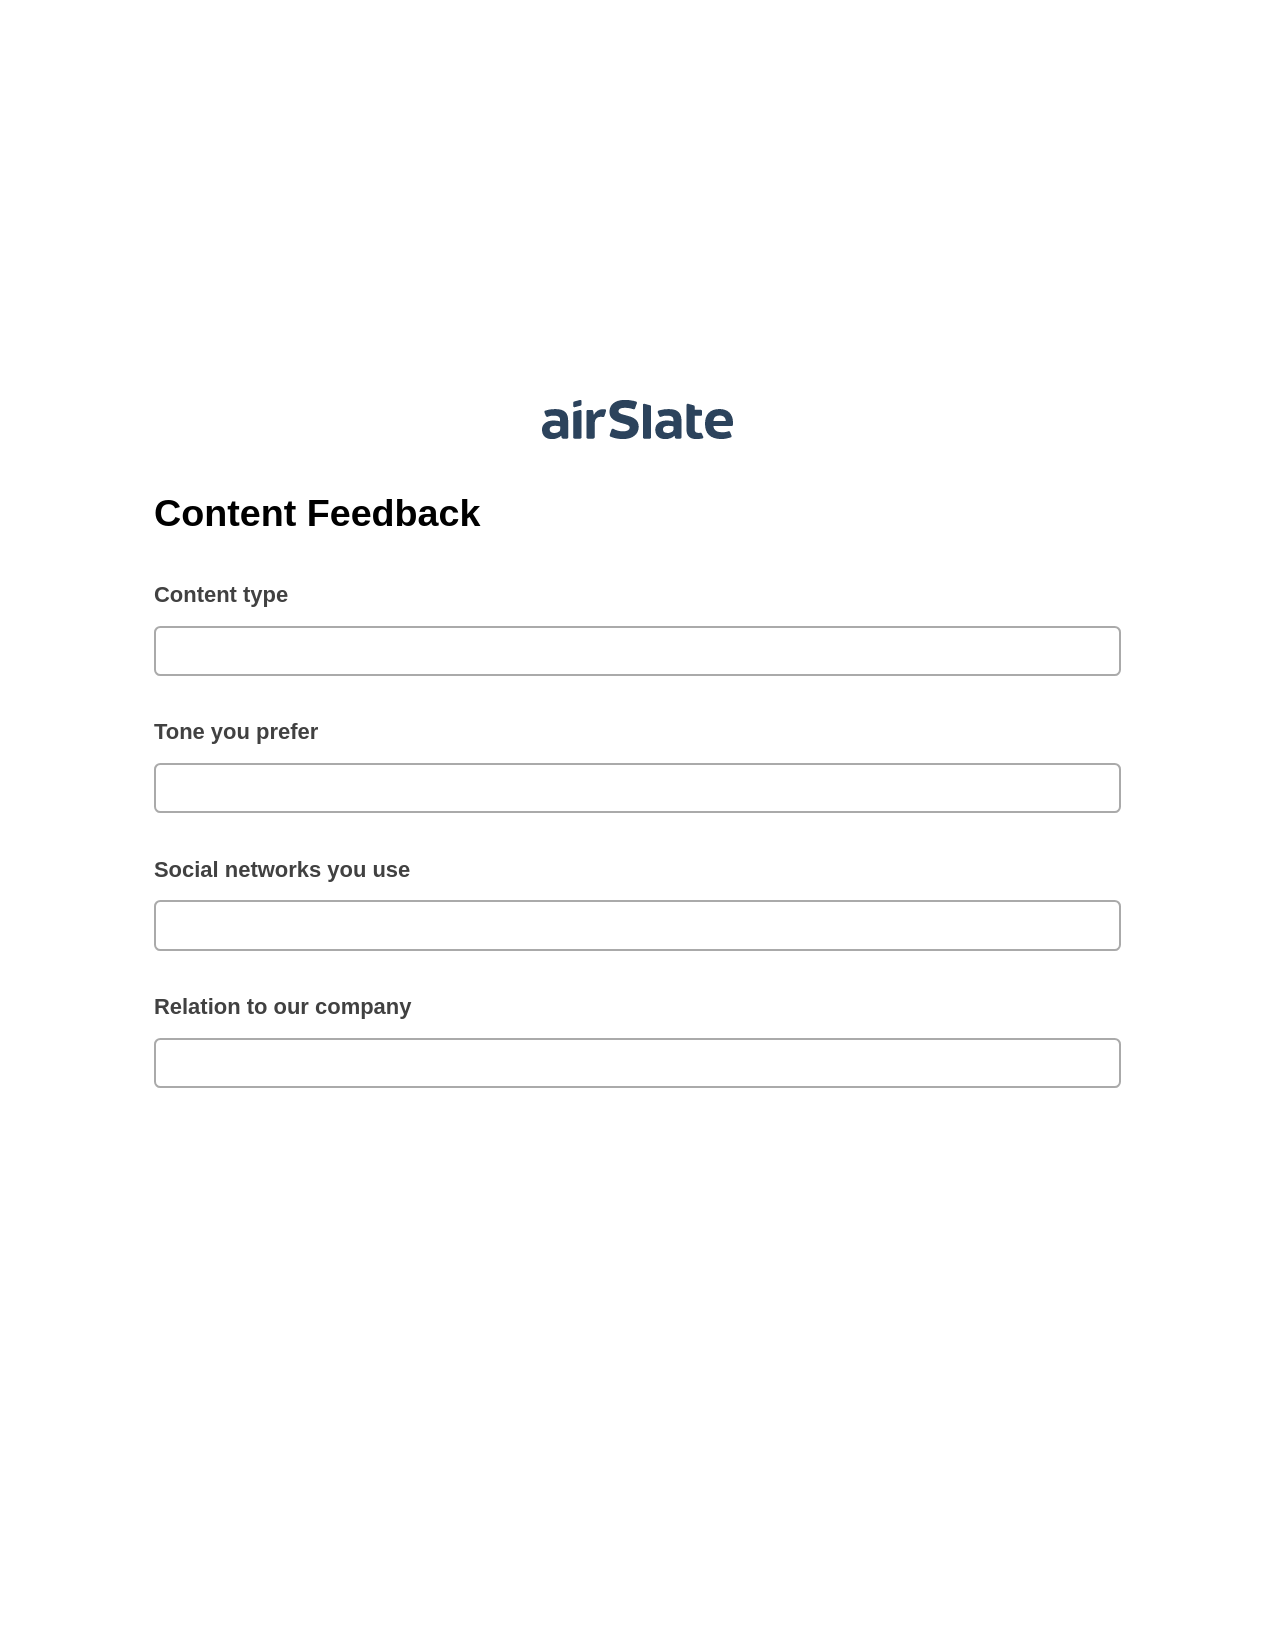 Content Feedback Pre-fill from Google Sheets Bot, Lock the slate bot, Export to Excel 365 Bot